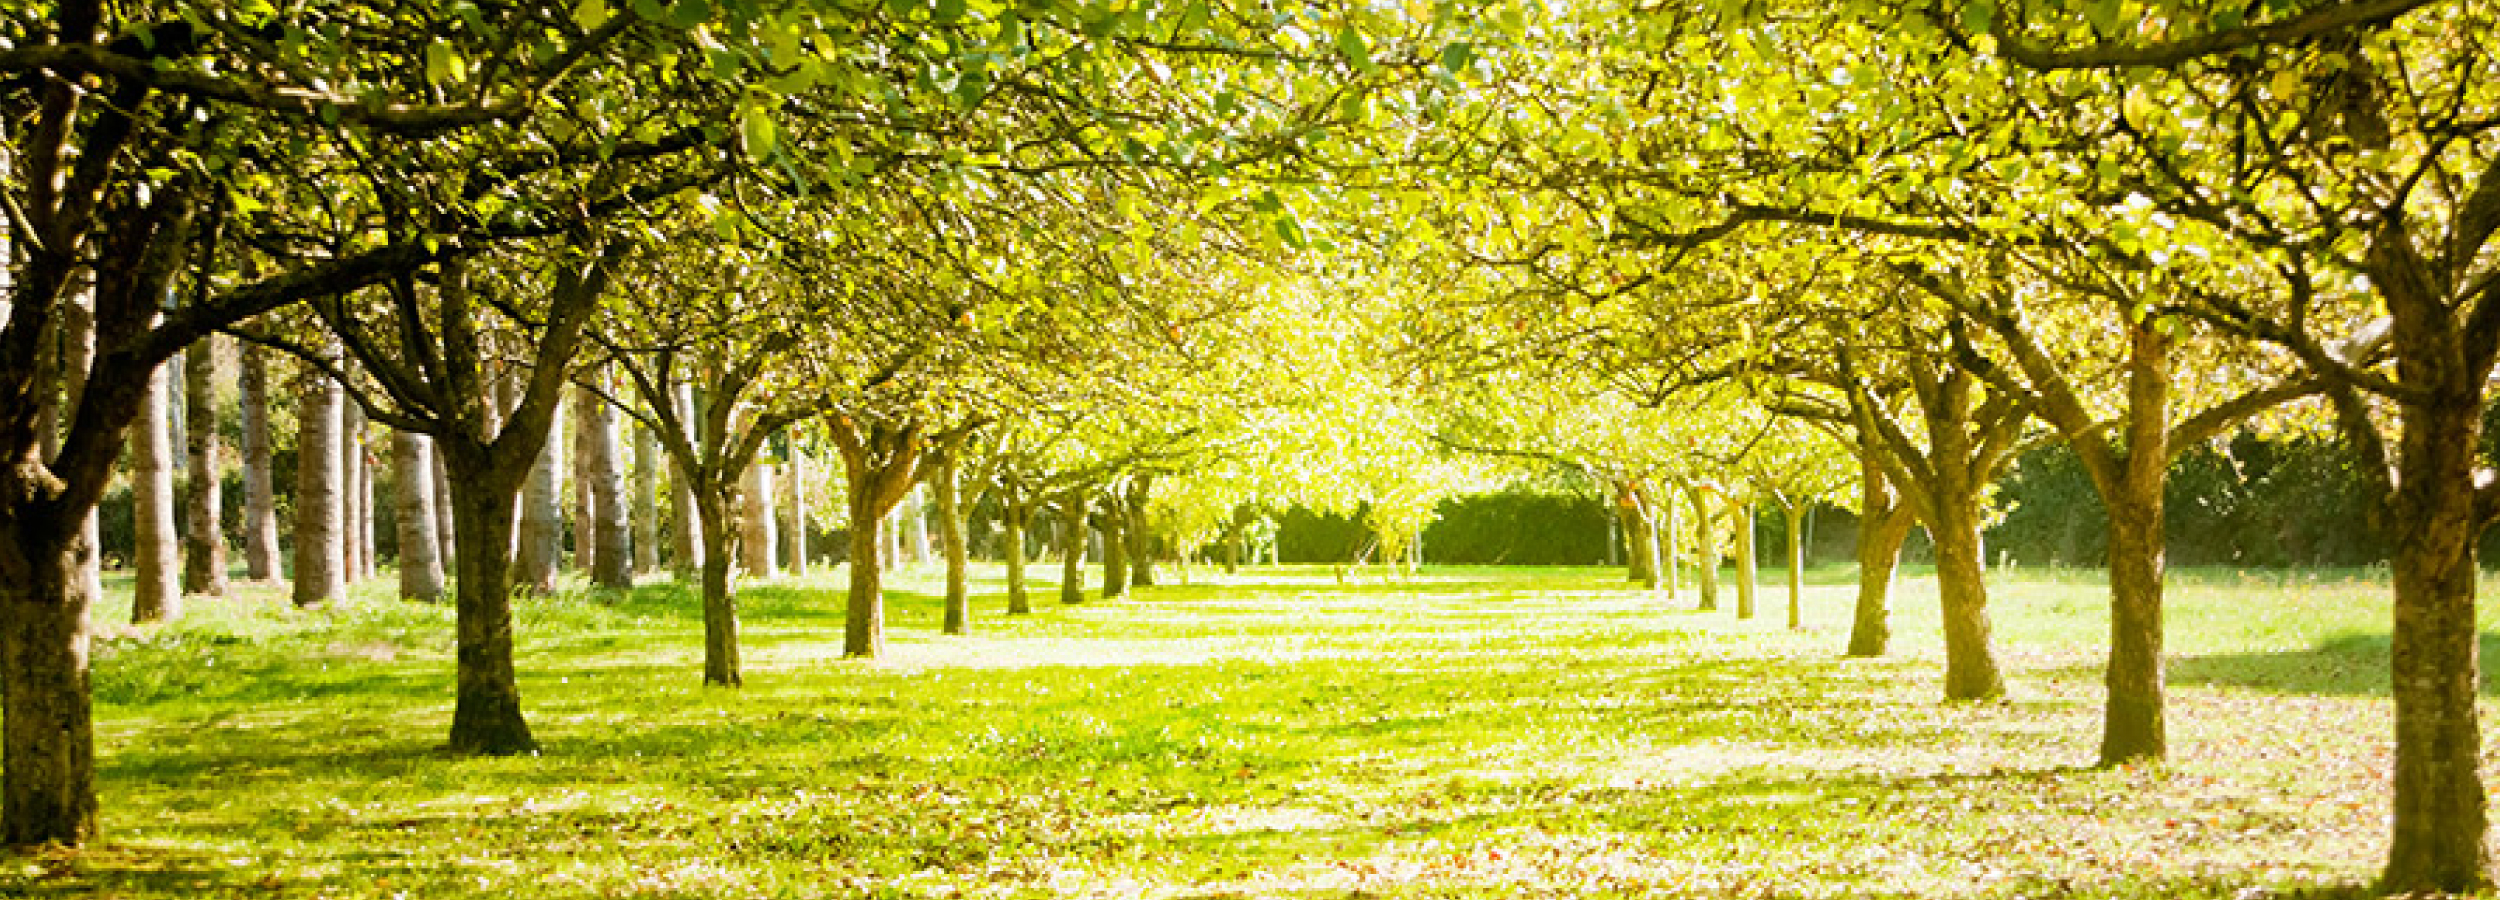 trees and garden - funeral packages Croydon